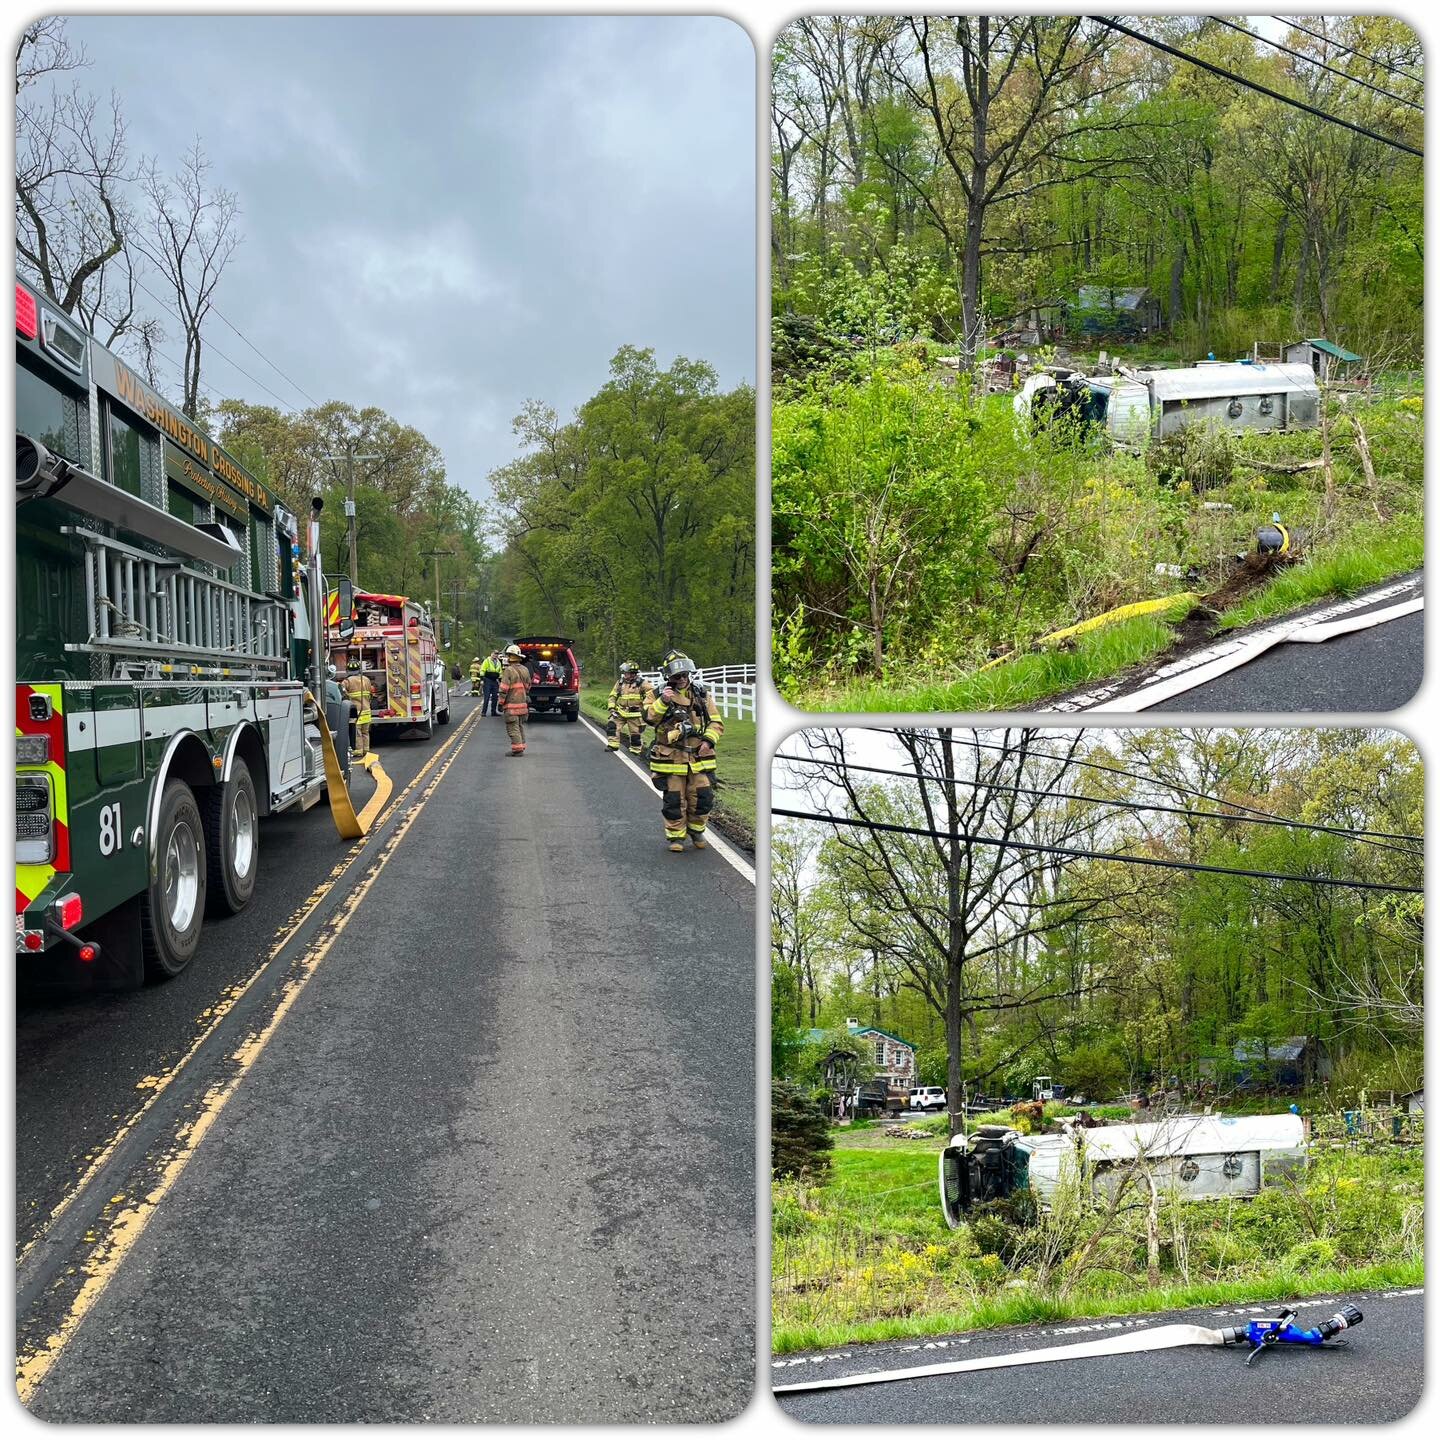 These photos from the site of an overturned fuel truck in Upper Makefield were posted on the township police department’s Facebook page today.